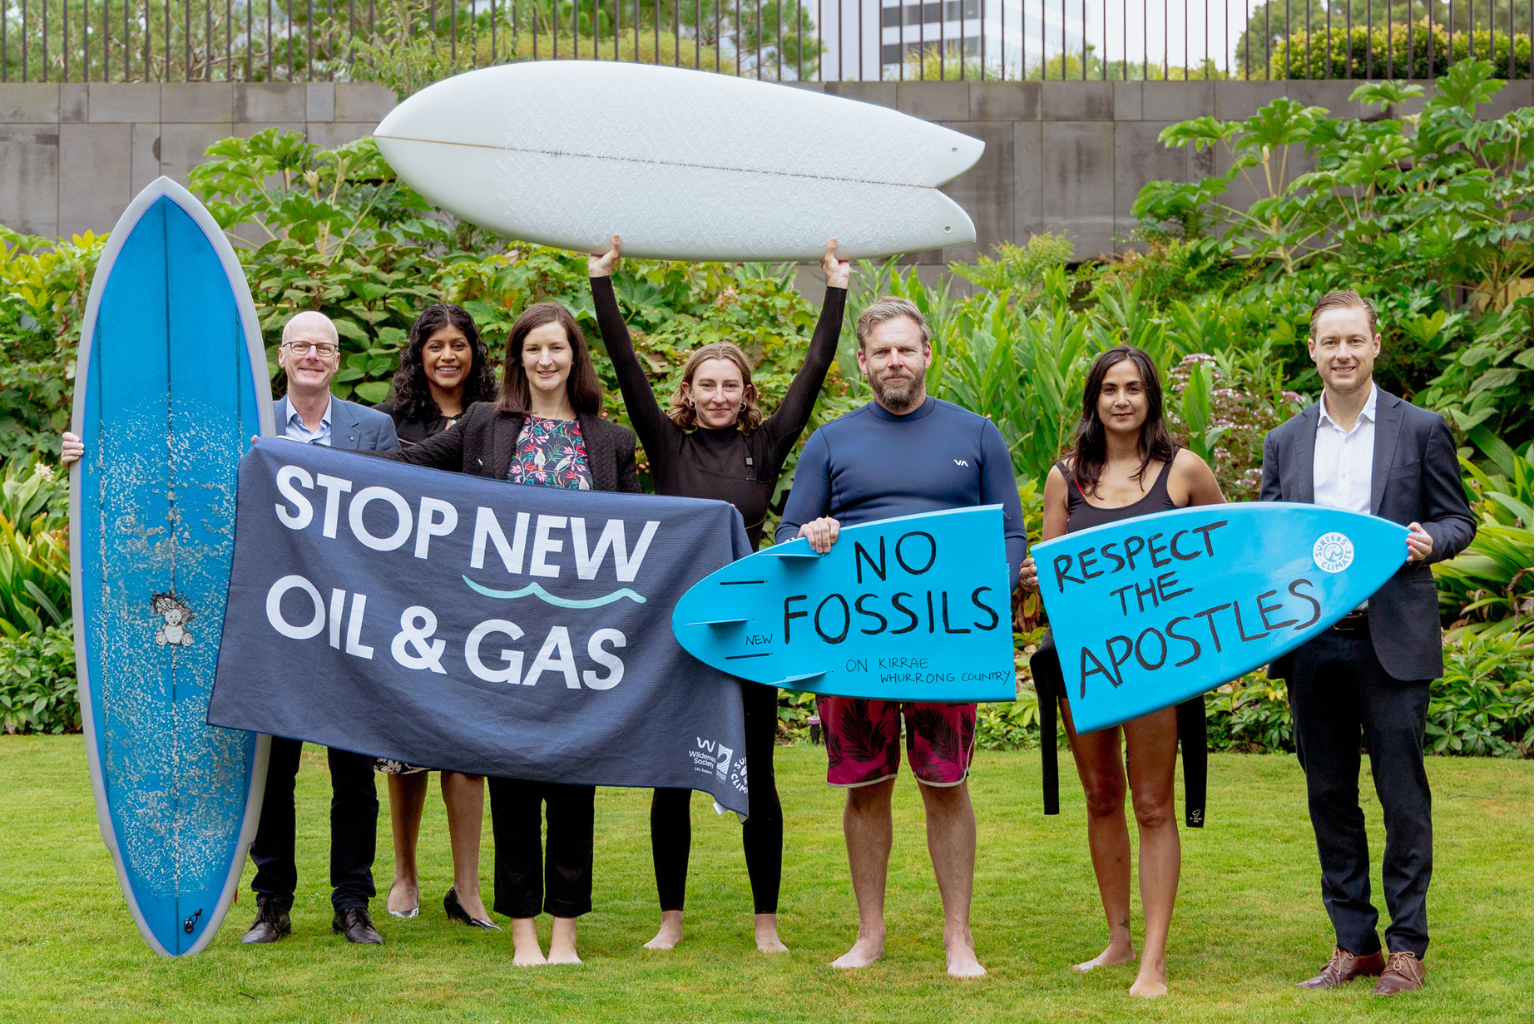 7 people holding signs that say stop new oil and gas and no fossils respect the apostles.